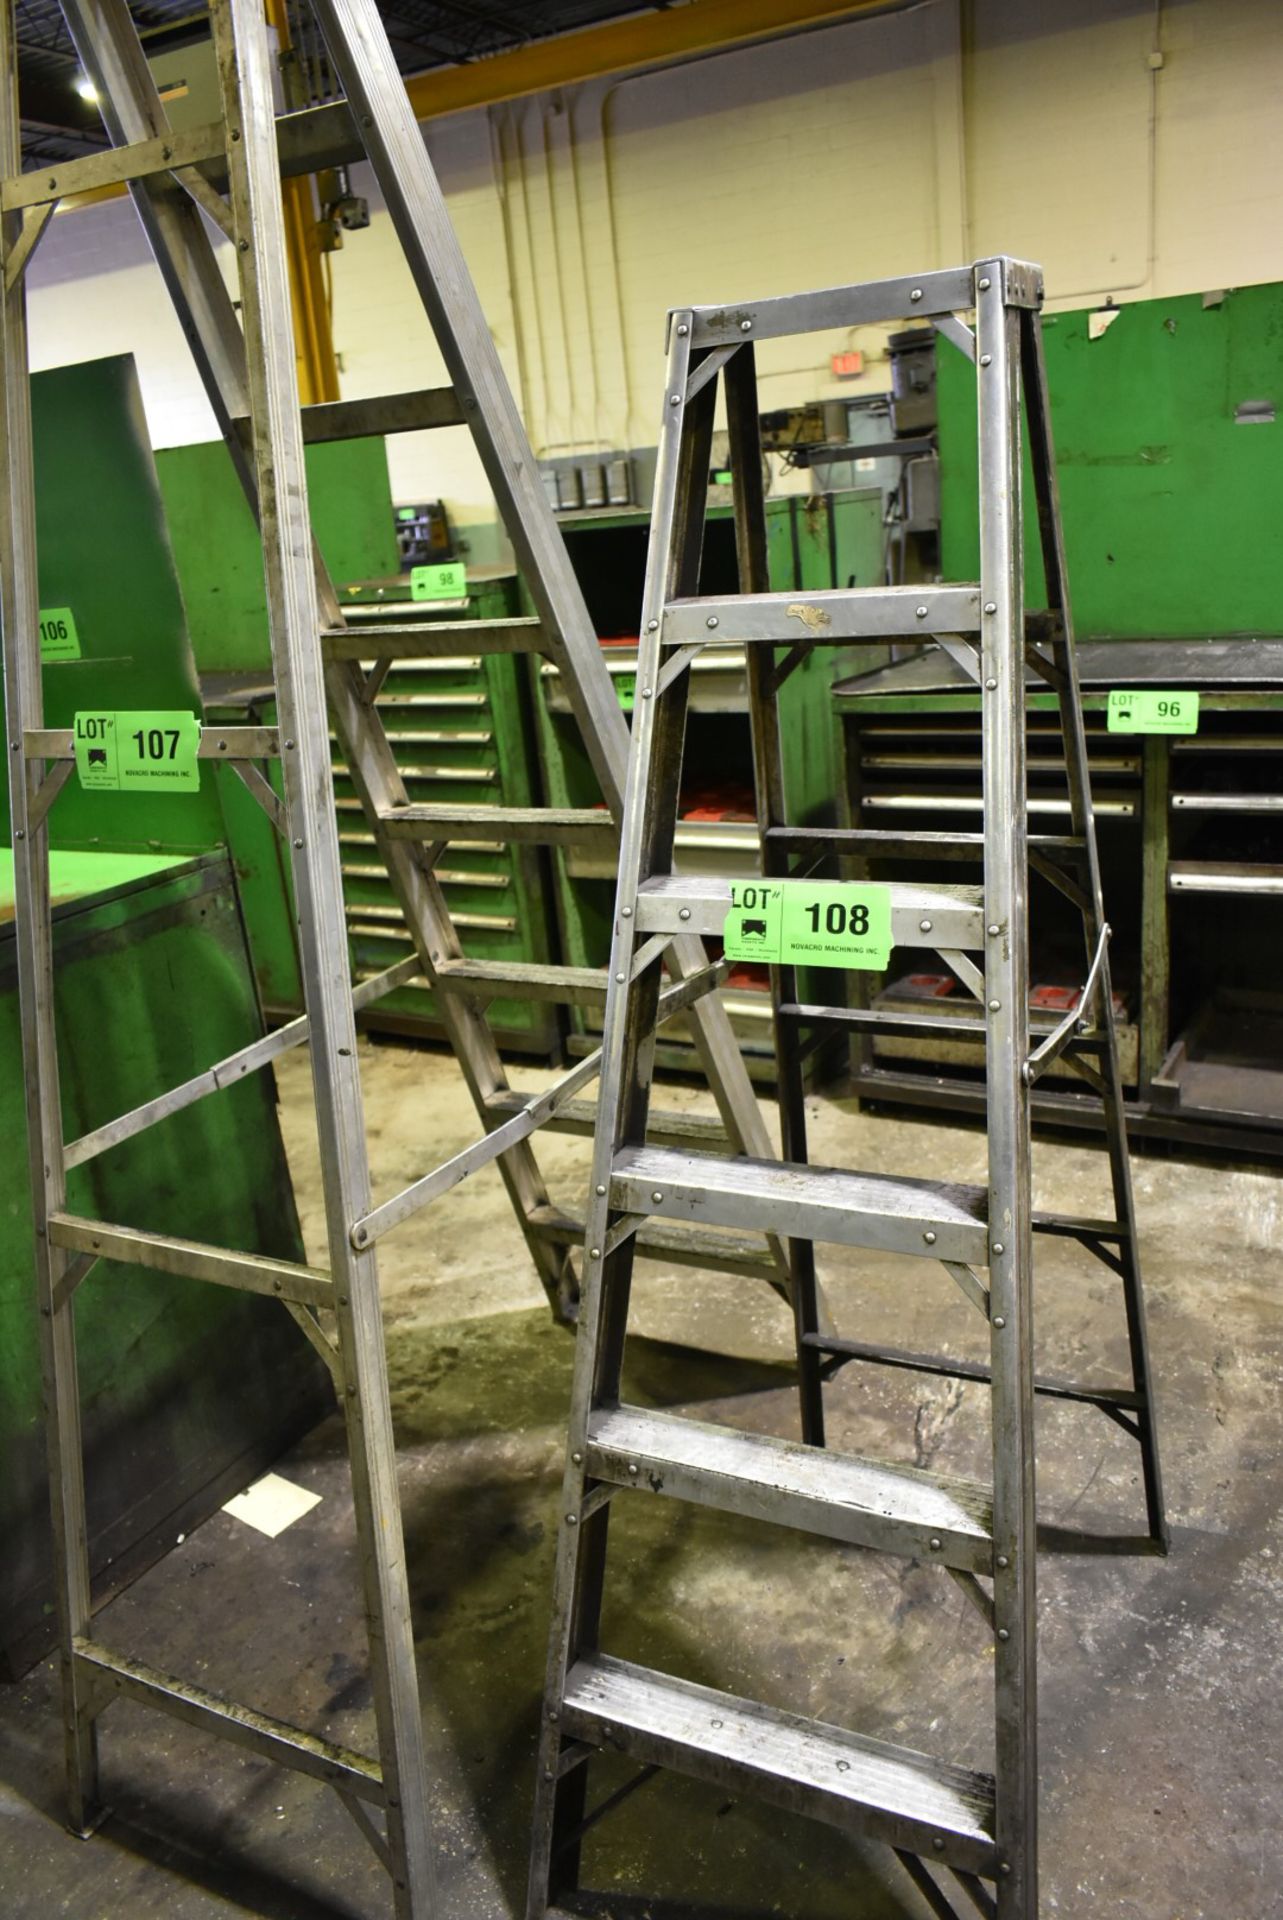 ALUMINUM A-FRAME LADDER [RIGGING FEE FOR LOT#108 - $25 USD PLUS APPLICABLE TAXES]